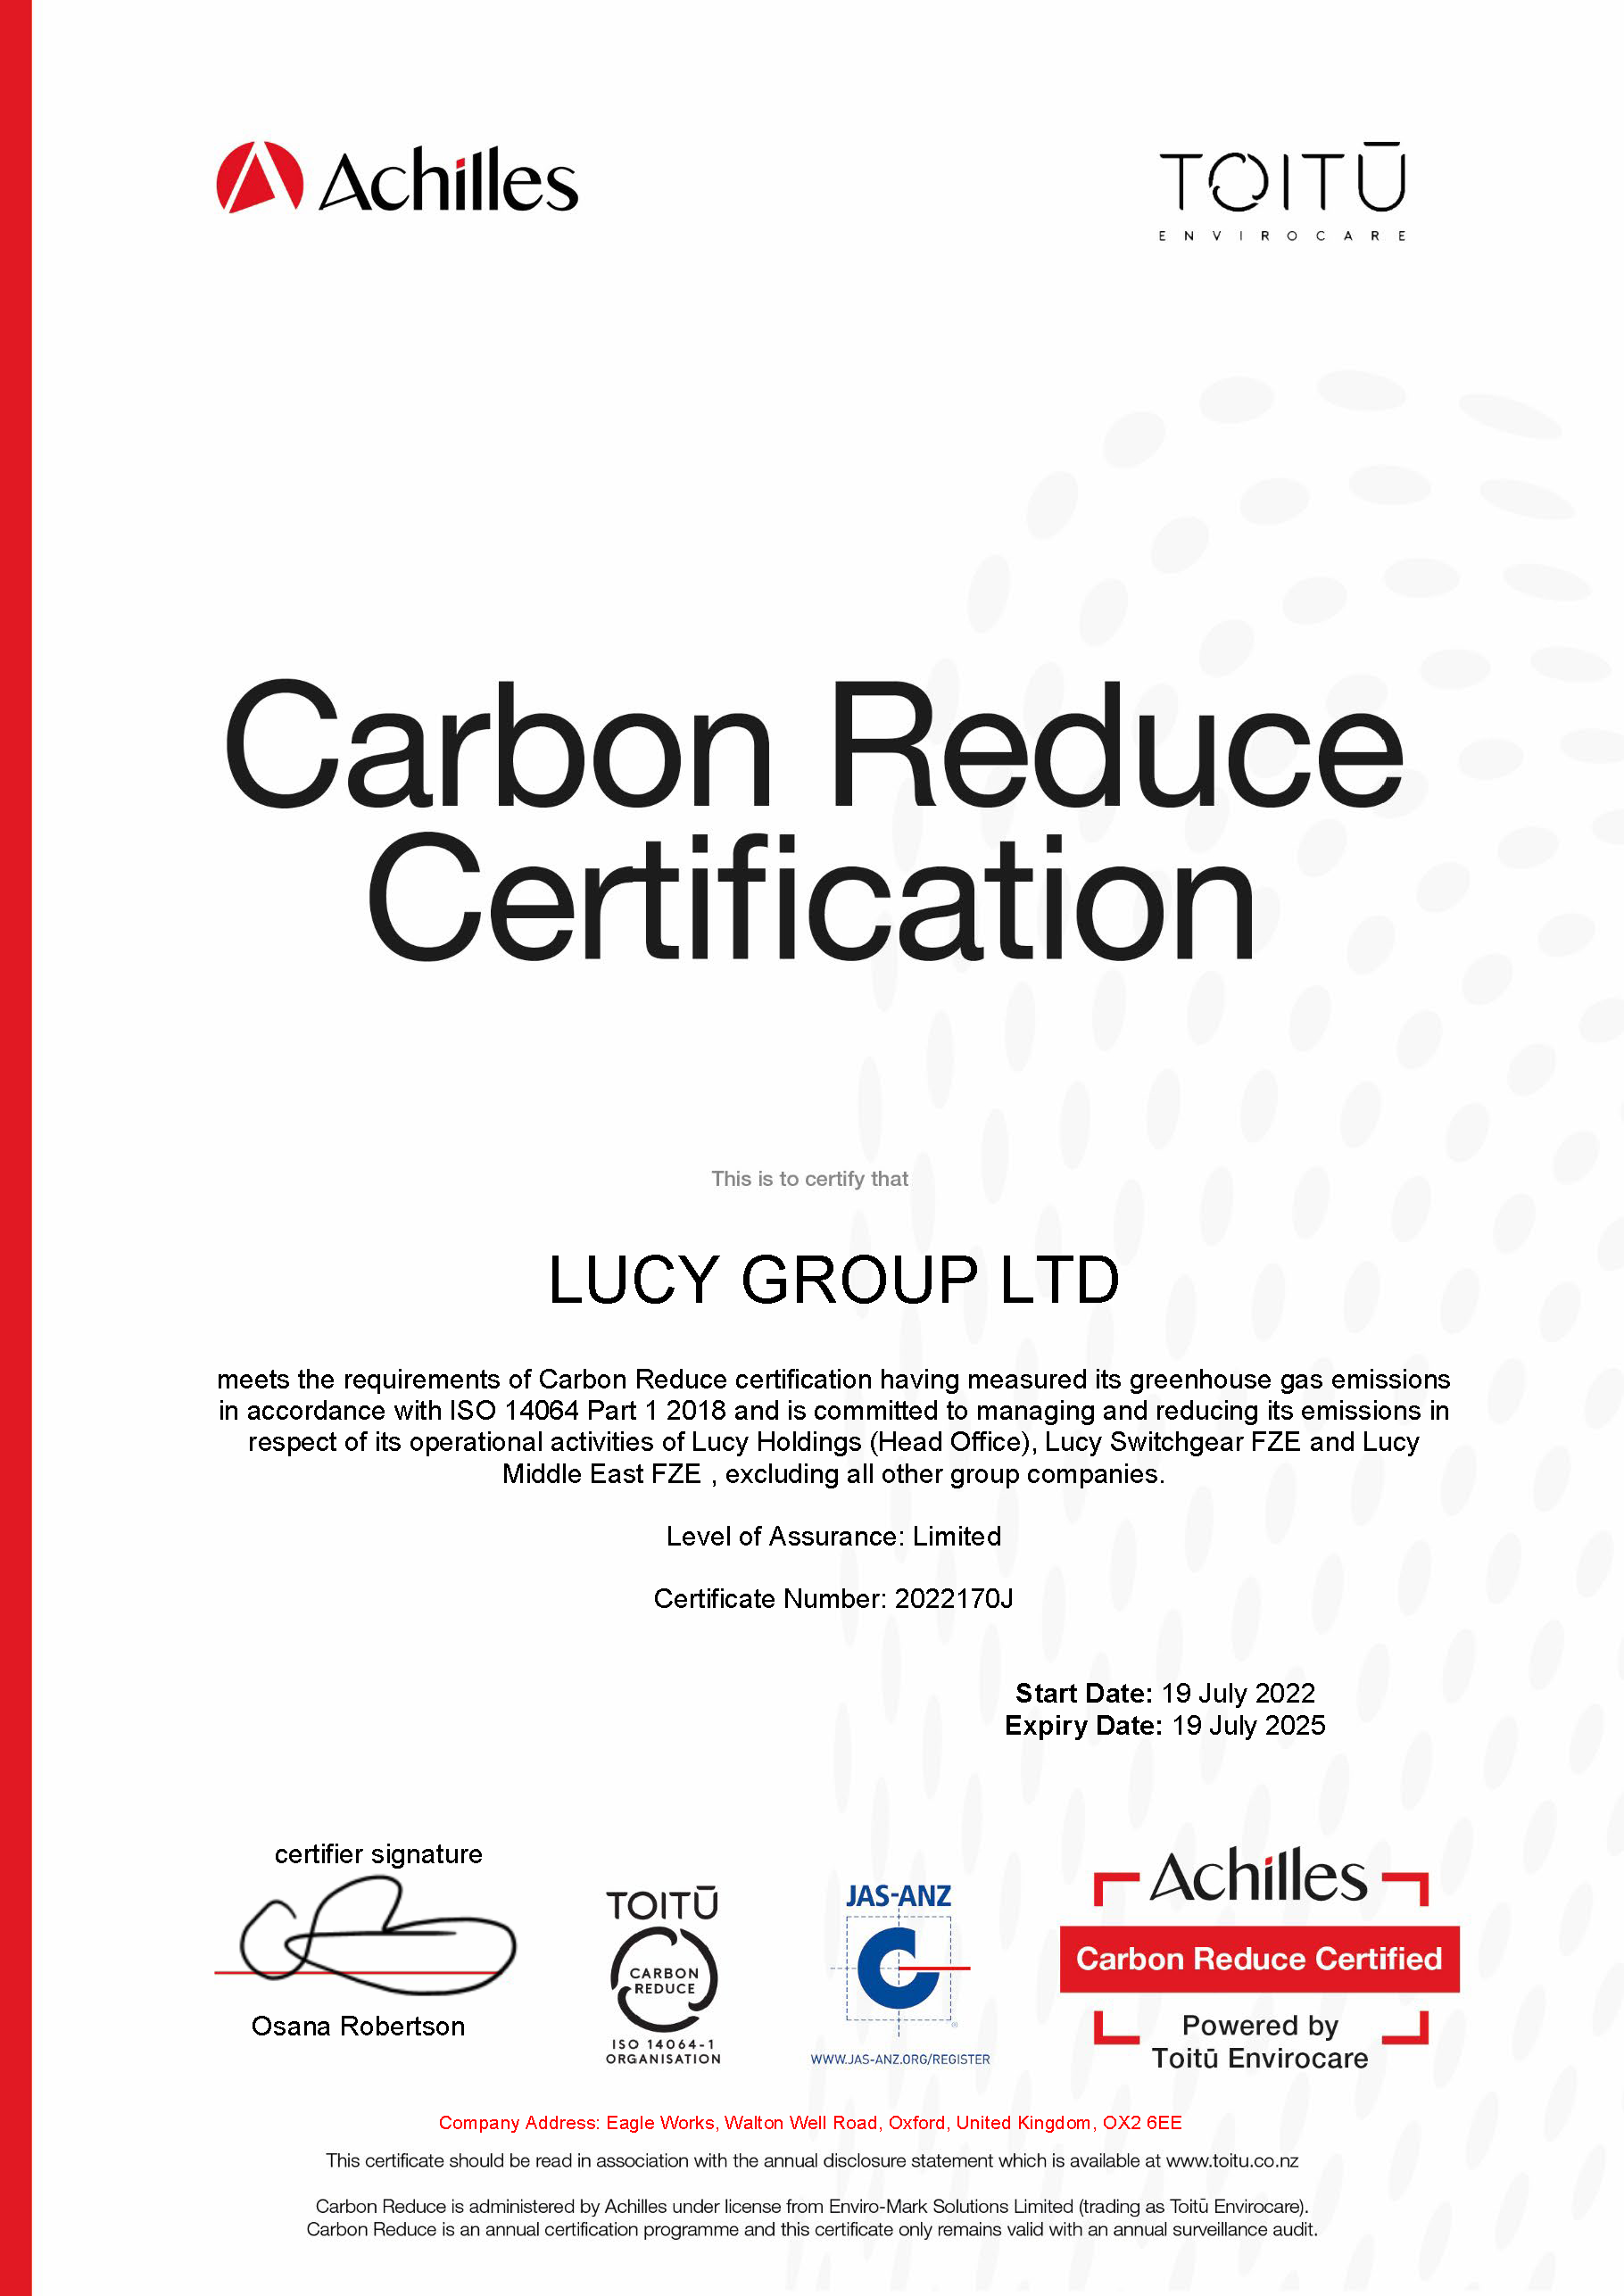 Carbon Reduction Certificate 2022